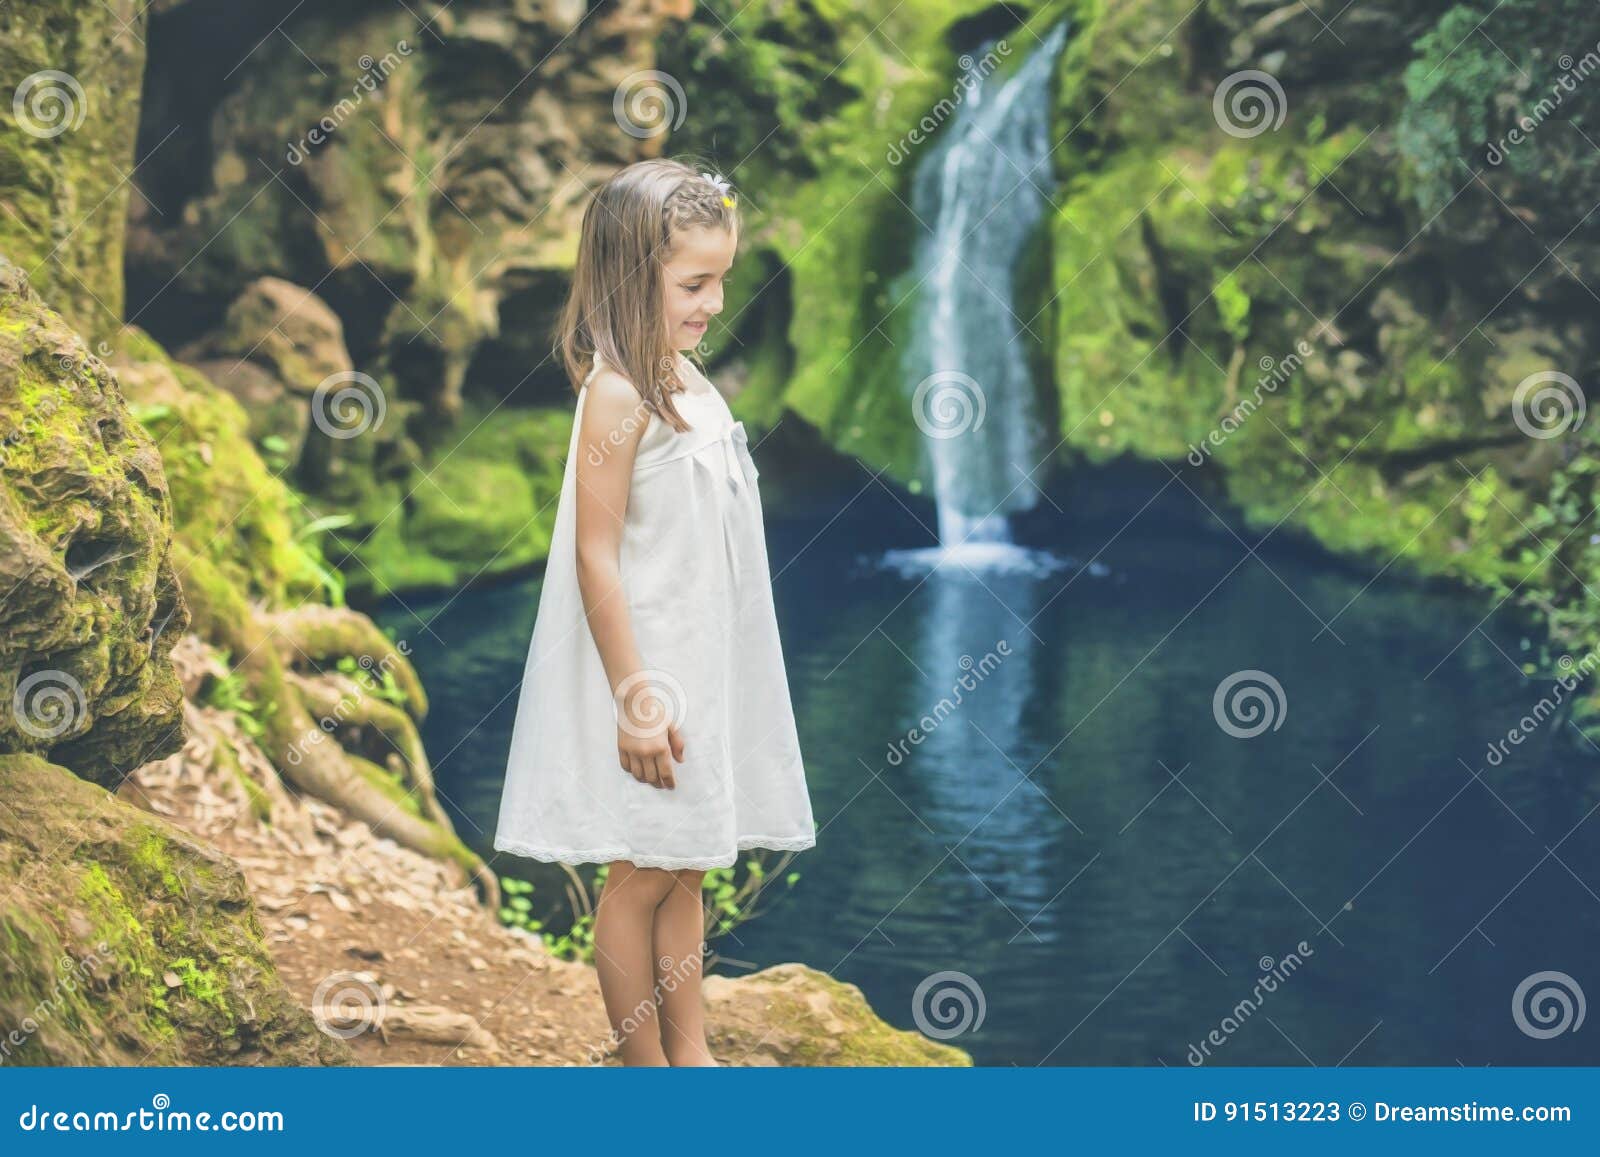 little girl looks at the smiling water by a river